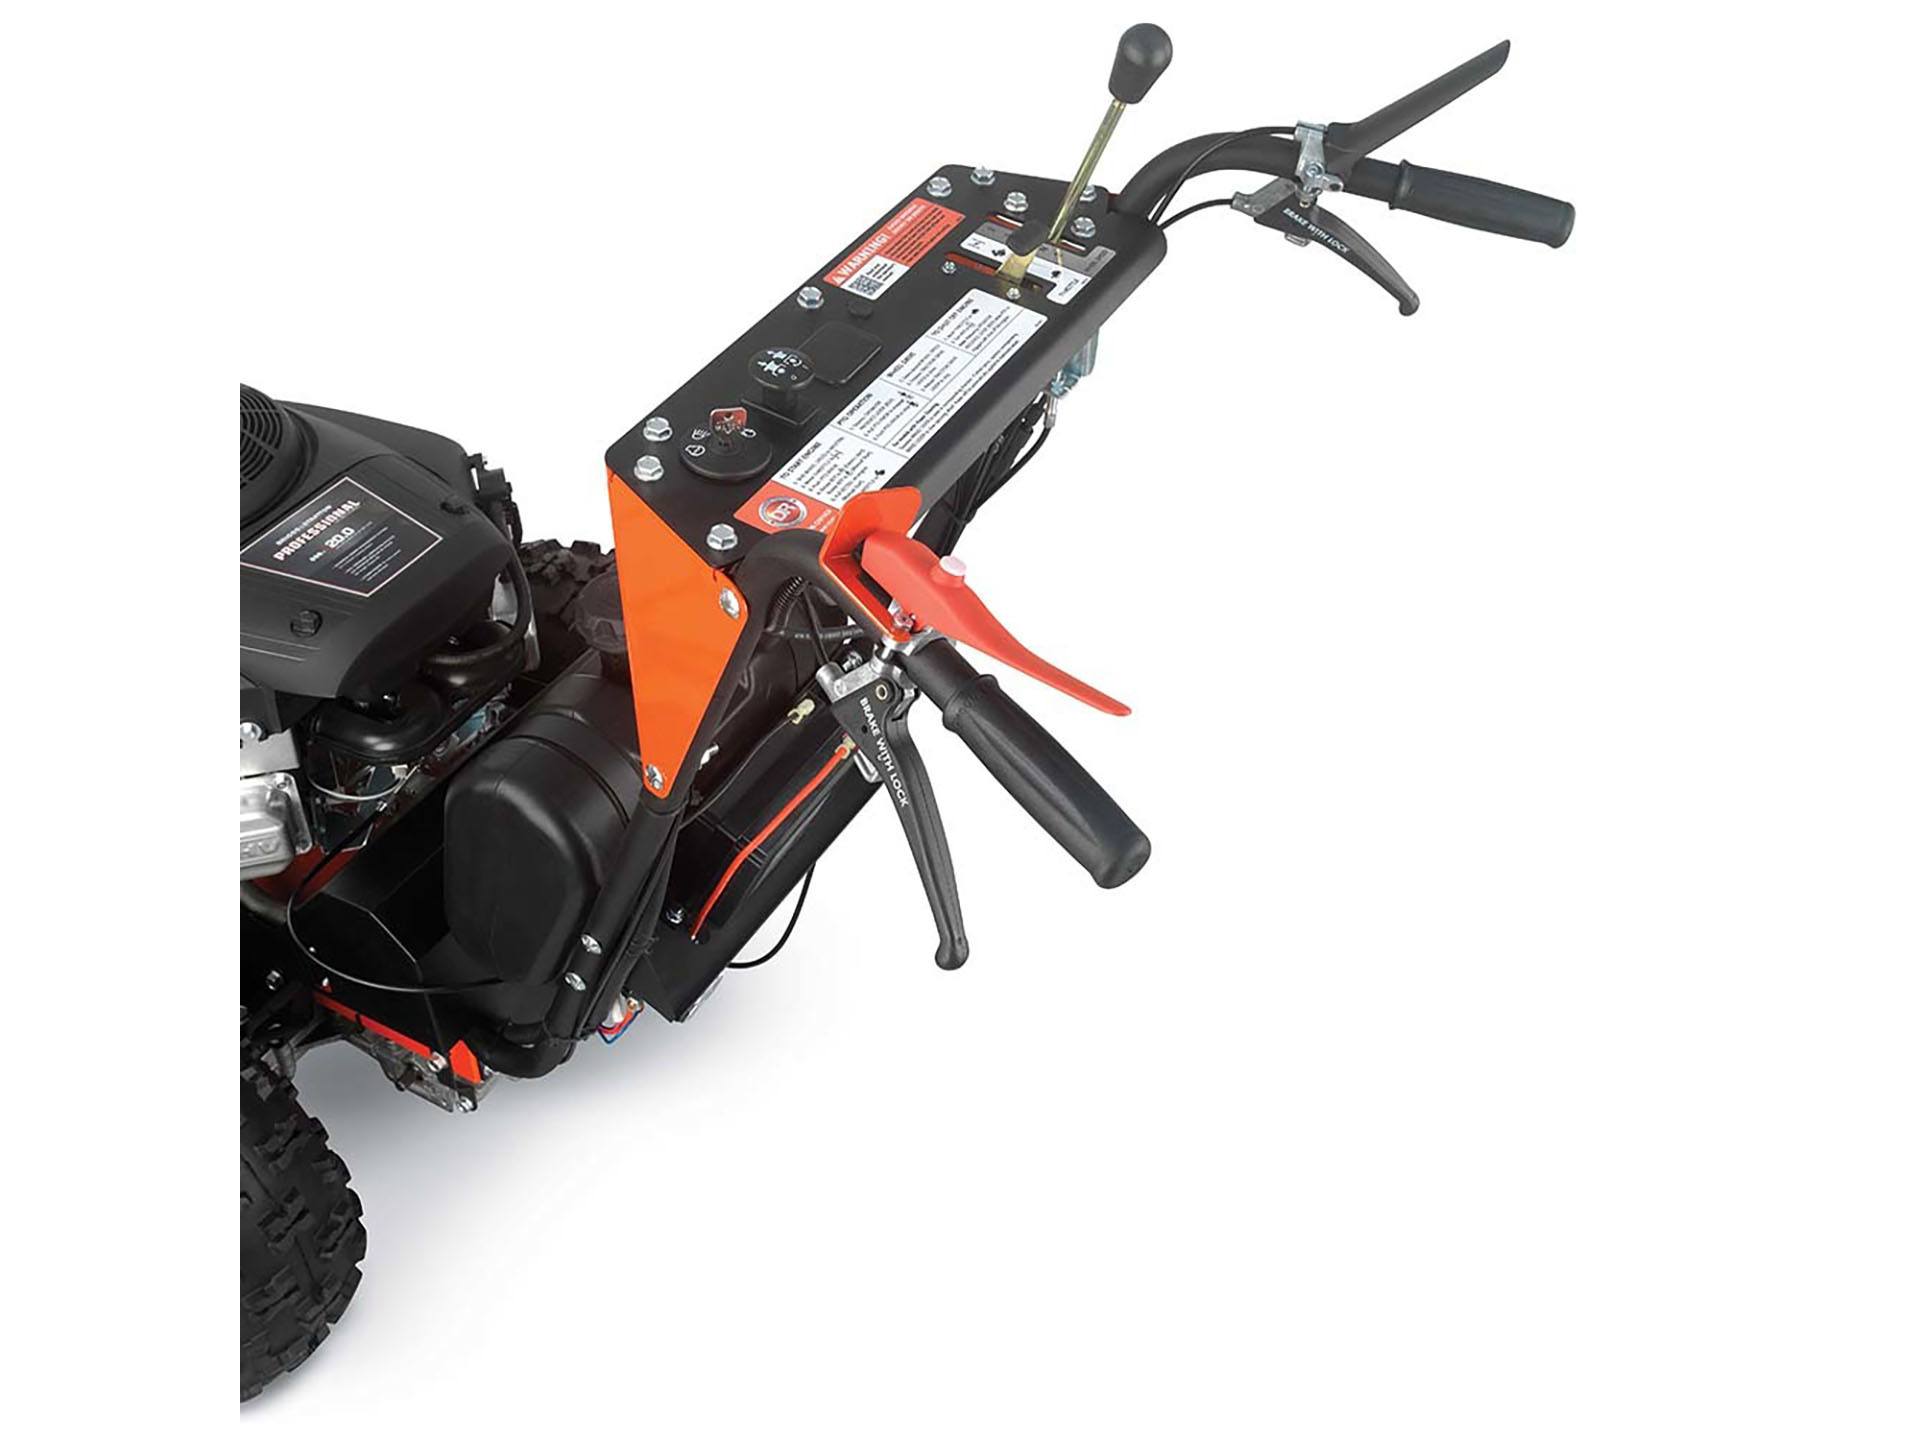 DR Power Equipment Pro Max34 34 in. Briggs & Stratton 22 hp in Saint Helens, Oregon